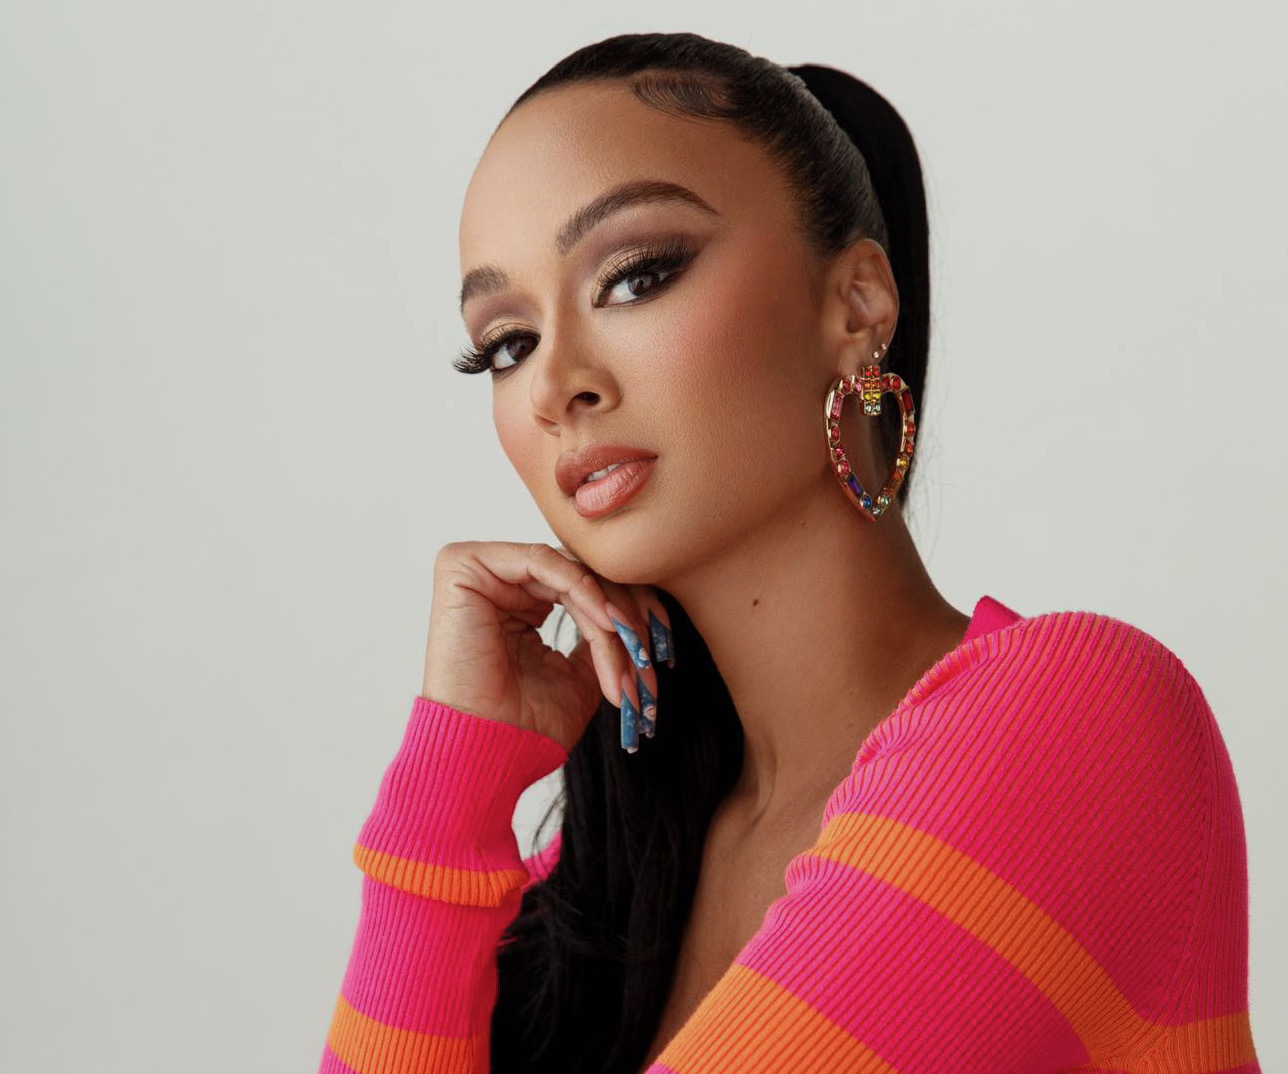 Exclusive: Draya Michele in the Running to Replace Chanel West Coast as Co-Host of MTV’s ‘Ridiculousness’